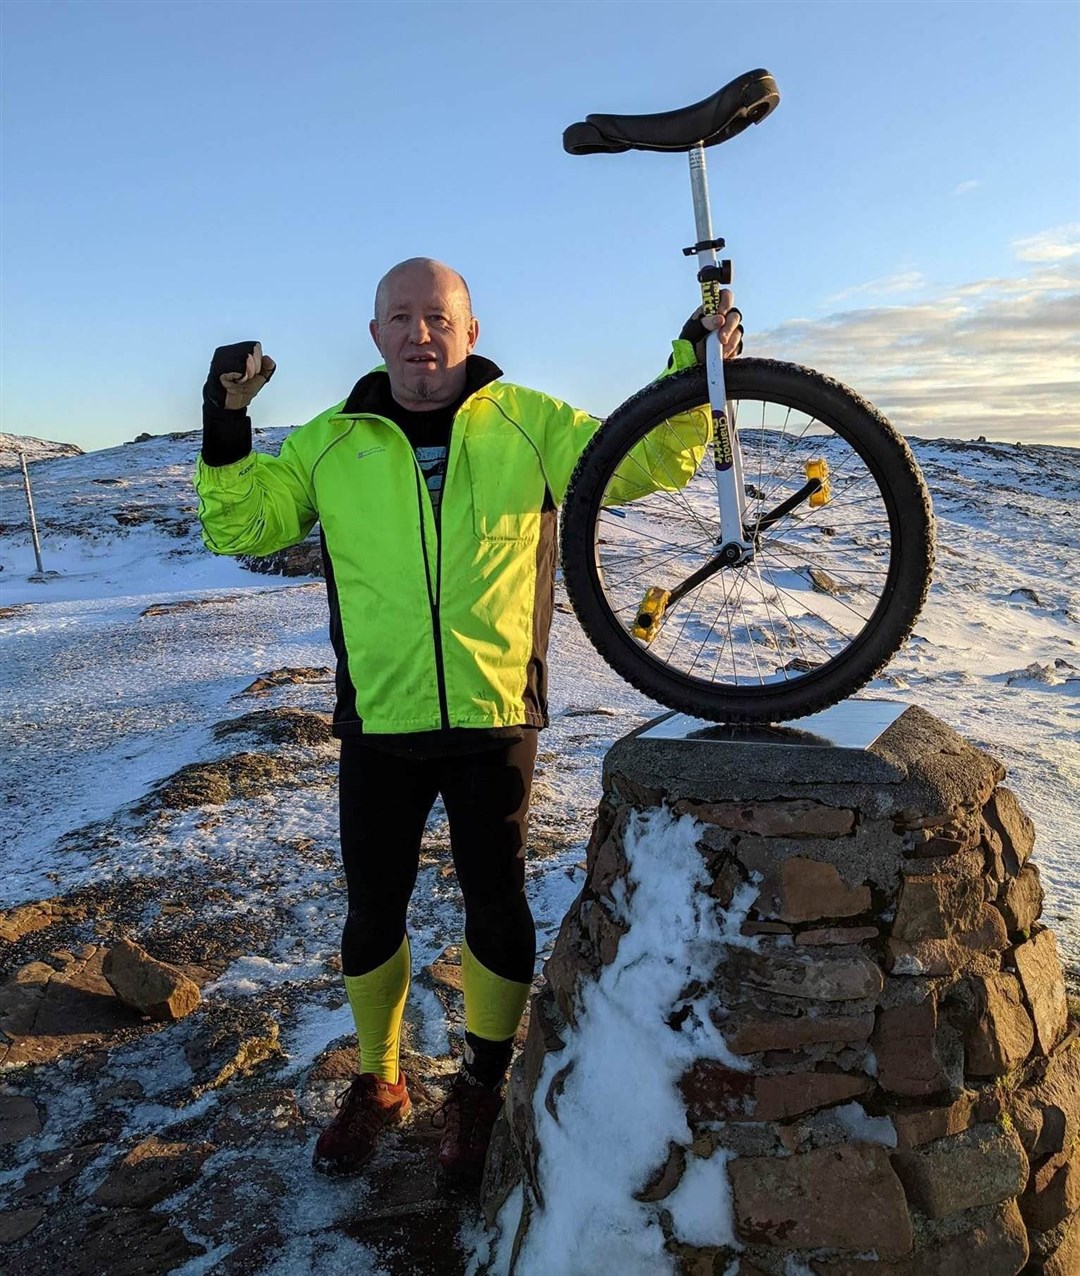 Bruce training on the Bealach Na Ba at Applecross. He said: “I unicycled the Bealach before Christmas with the belief that if I could conquer that on a unicycle then I could ride the rest of the NC500.”